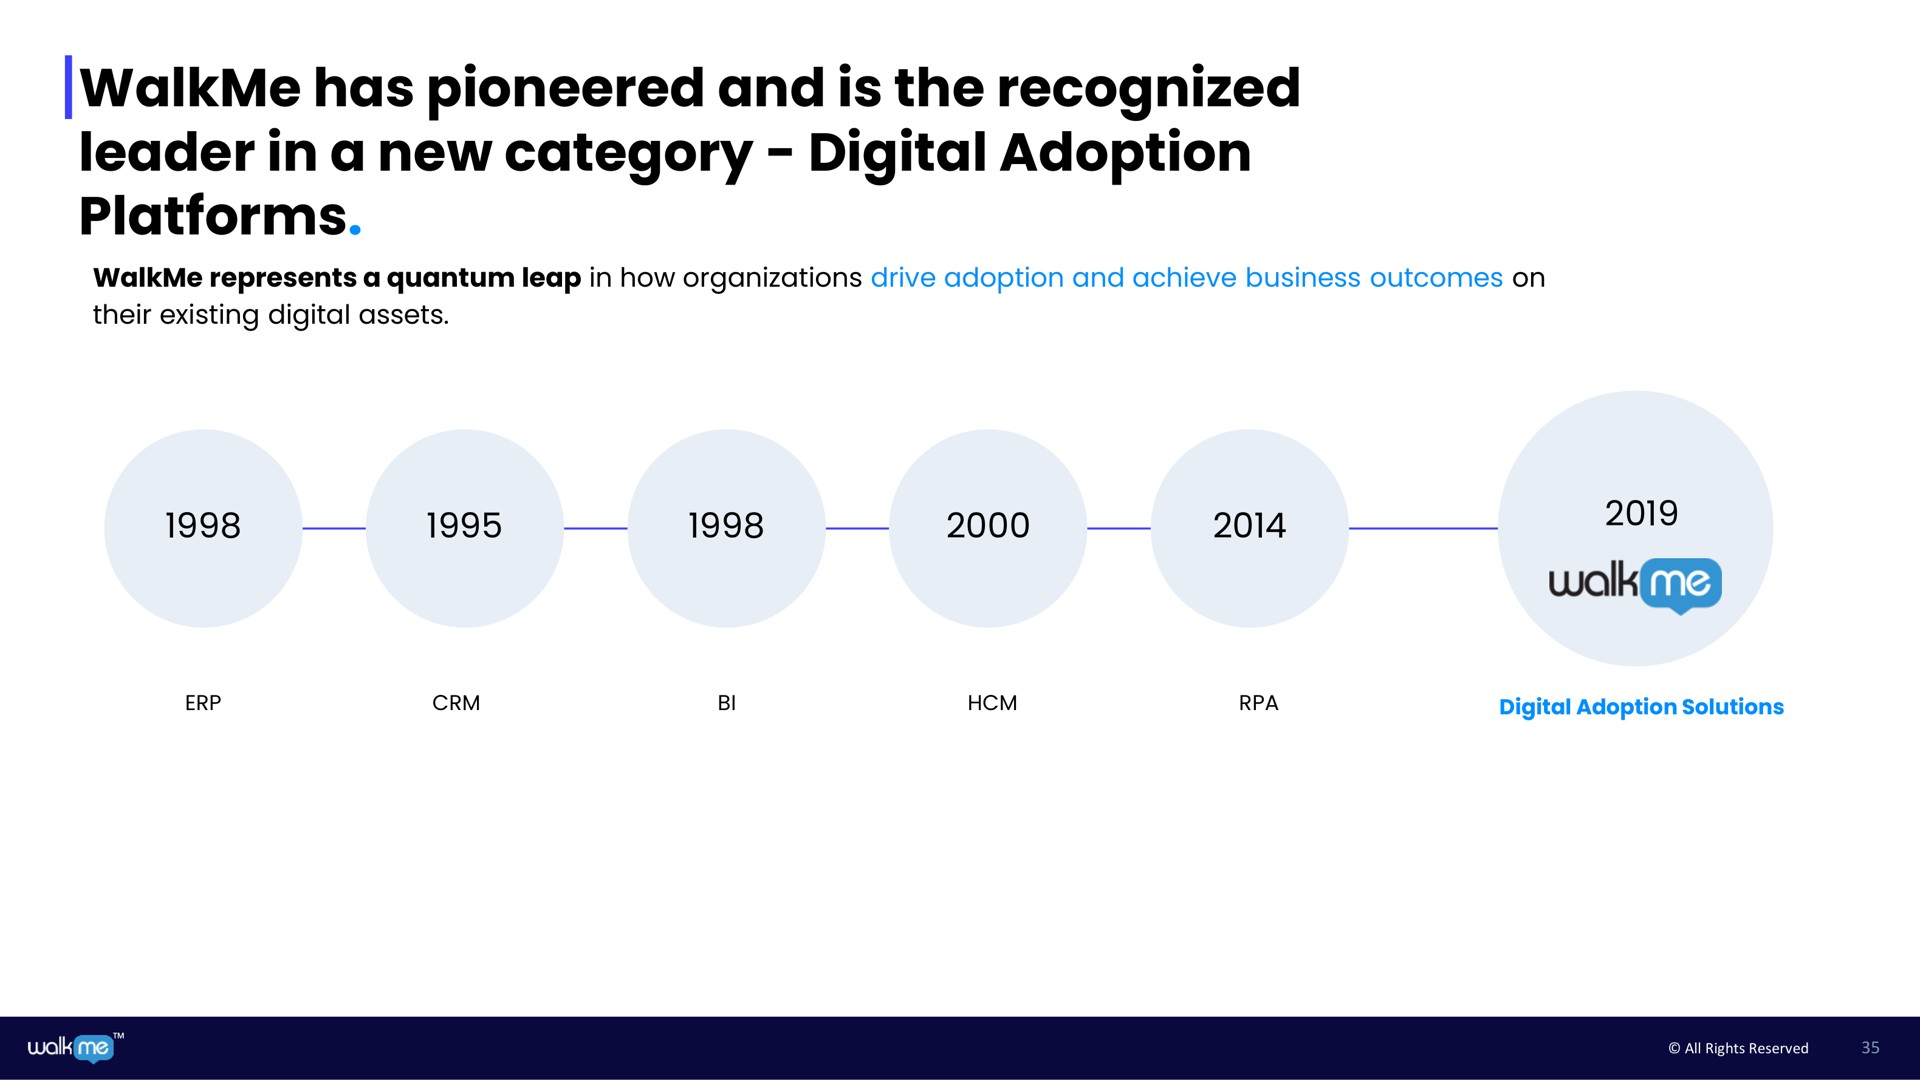 has pioneered and is the recognized leader in a new category digital adoption platforms | Walkme